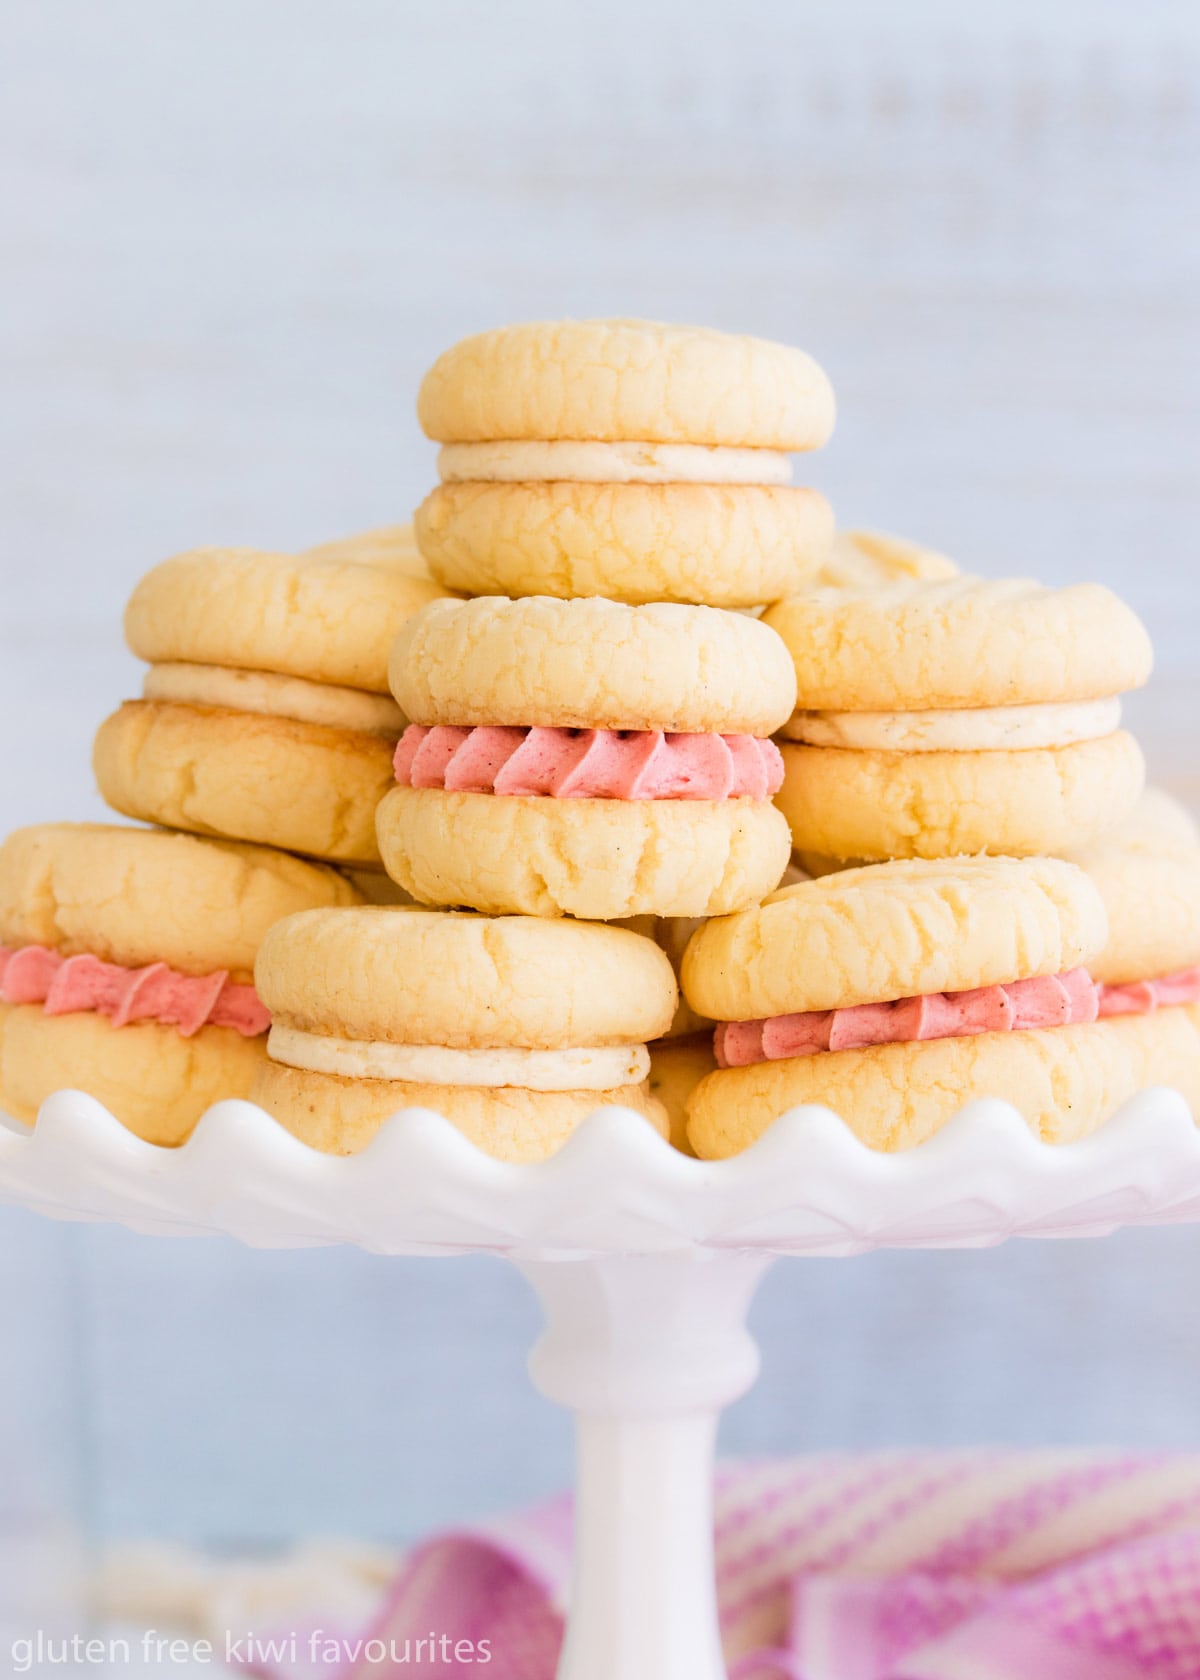 Gluten Free melting moment biscuits filled with pink and white buttercream on a white milk glass cake stand on a pale blue background.